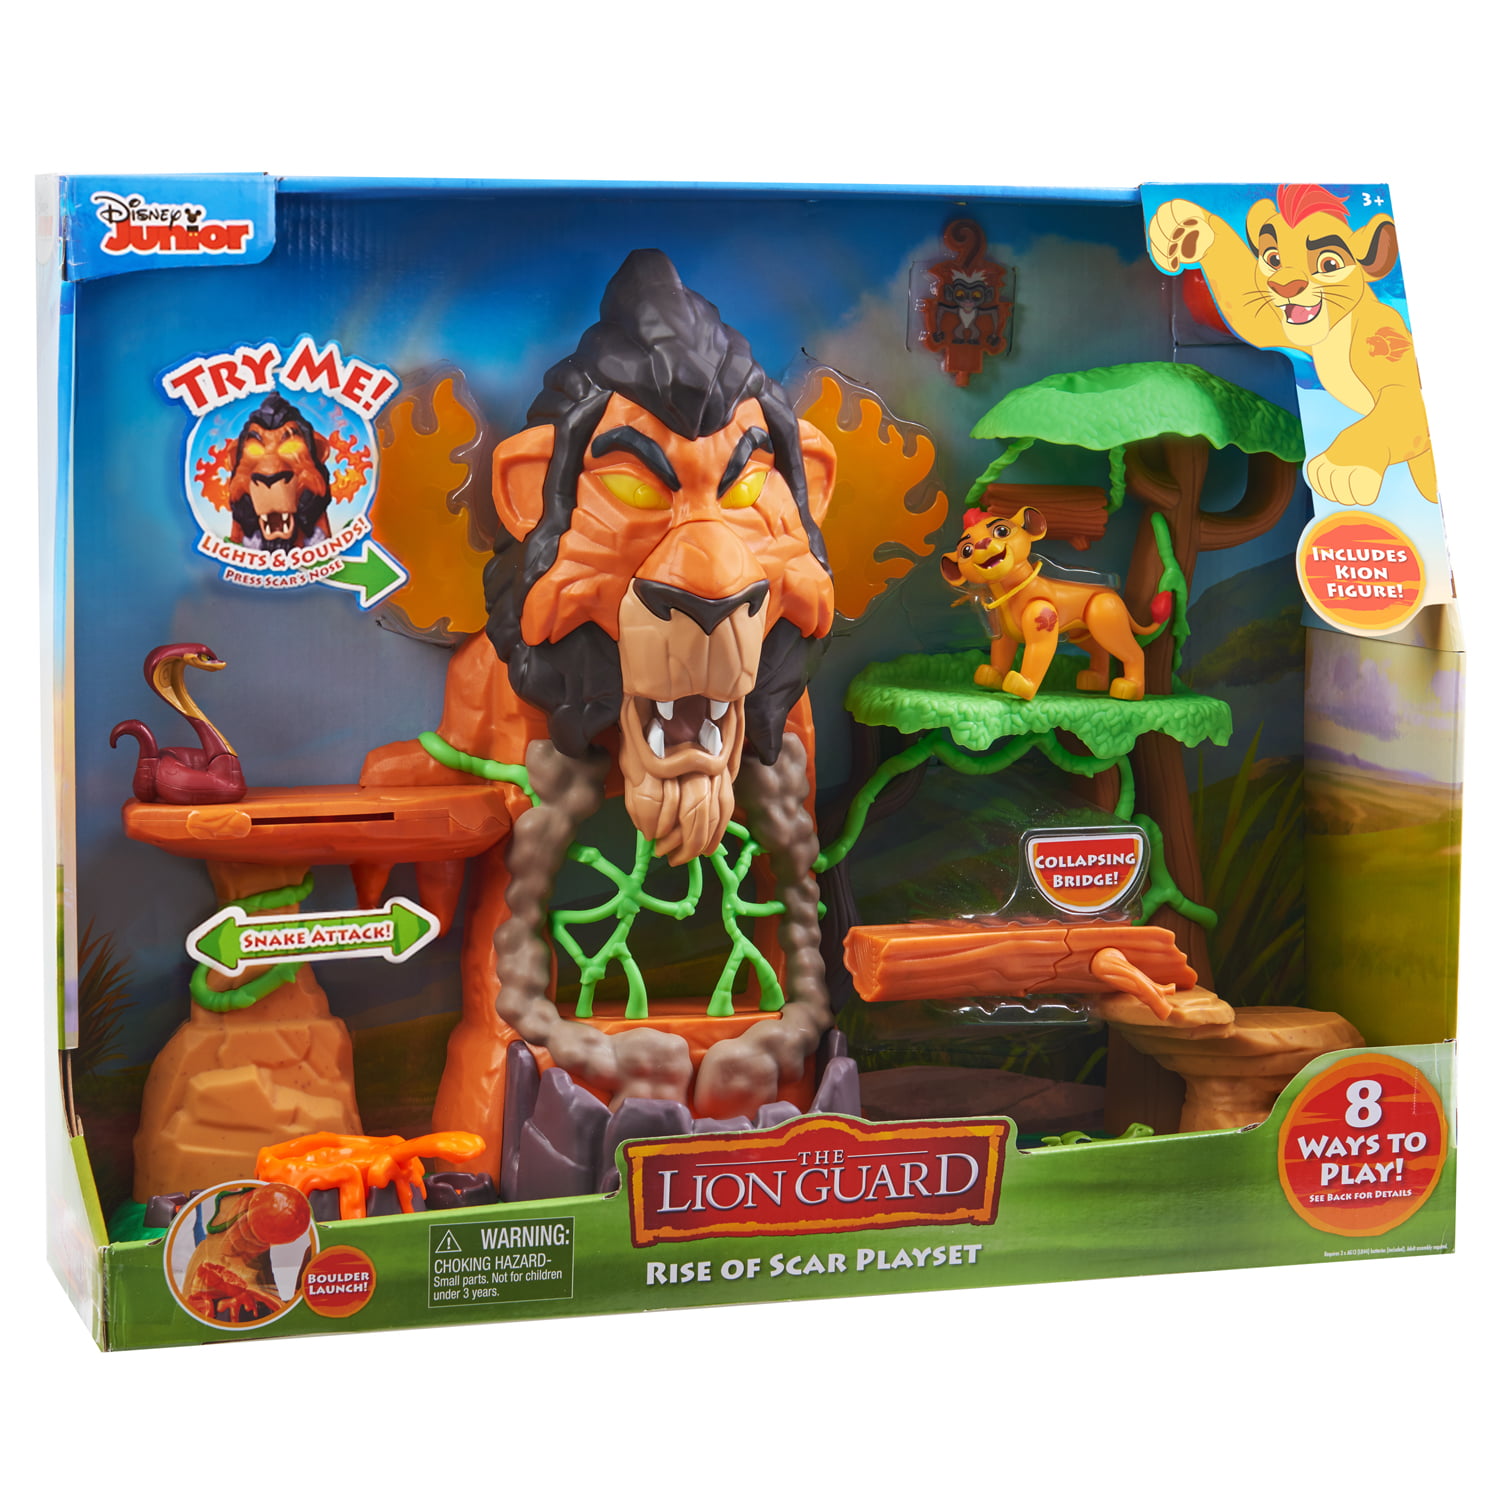 Lion Guard Rise of Scar Playset Disney King Toys Action Figure Lights ...